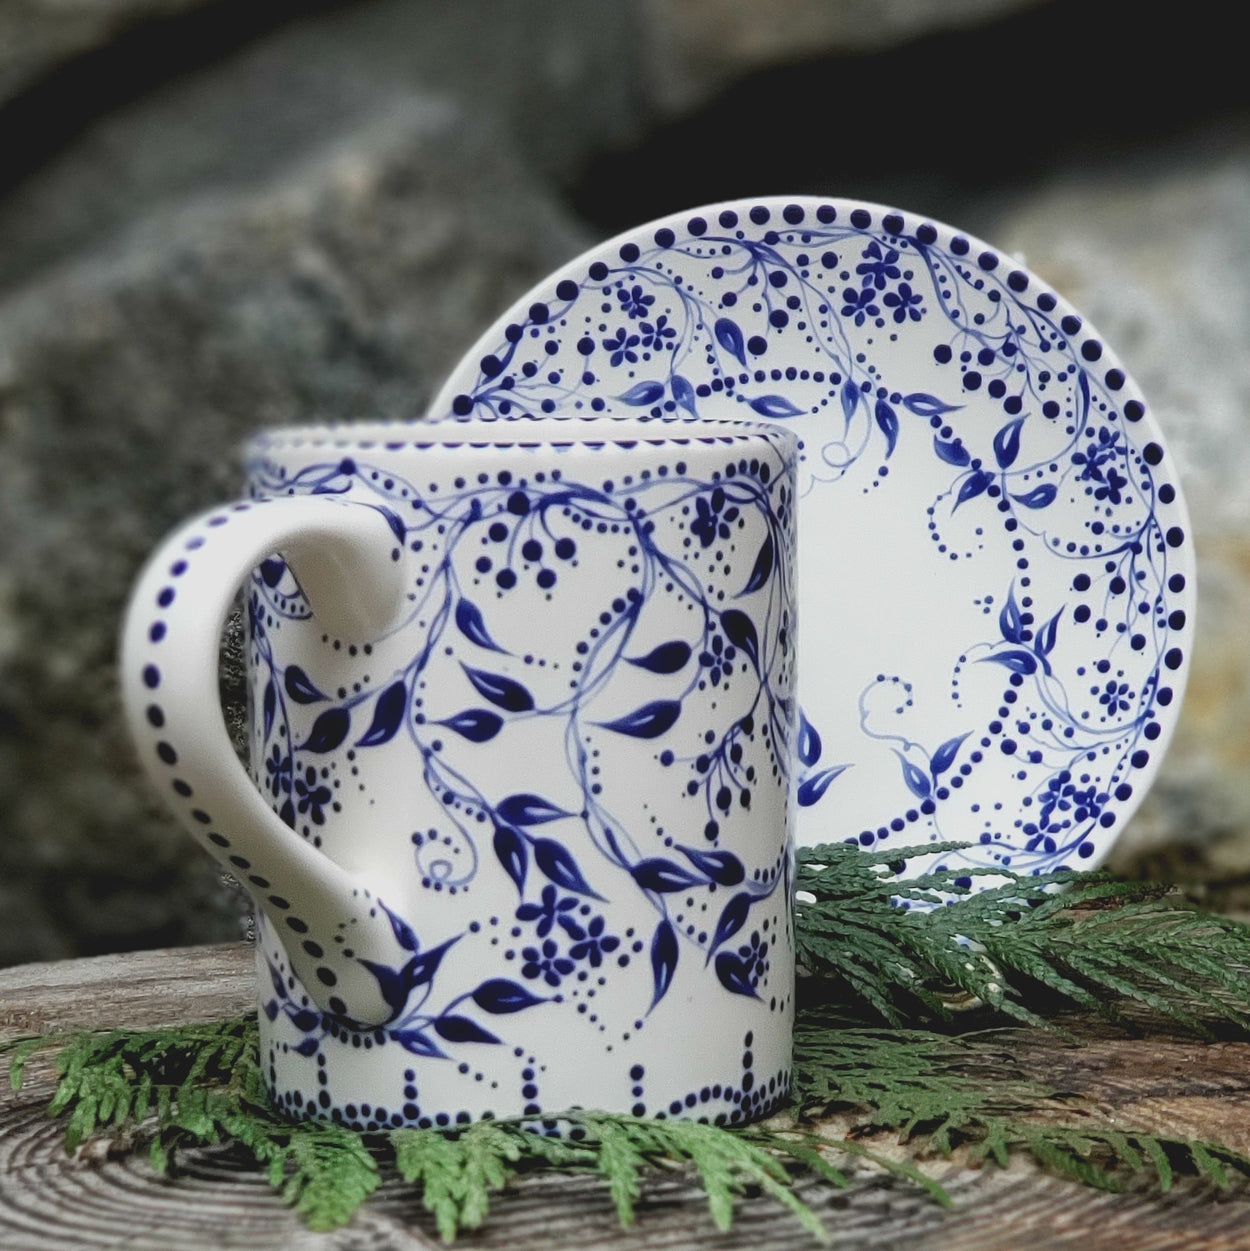 Hand painted cobalt blue mug and dessert plate...tiny blue vines and berries cover the mug and plate in a beautiful delicate all over design. mug is 16 oz kiln fired ceramic and the plate is a 6 inch kiln fired dessert \cookie plate